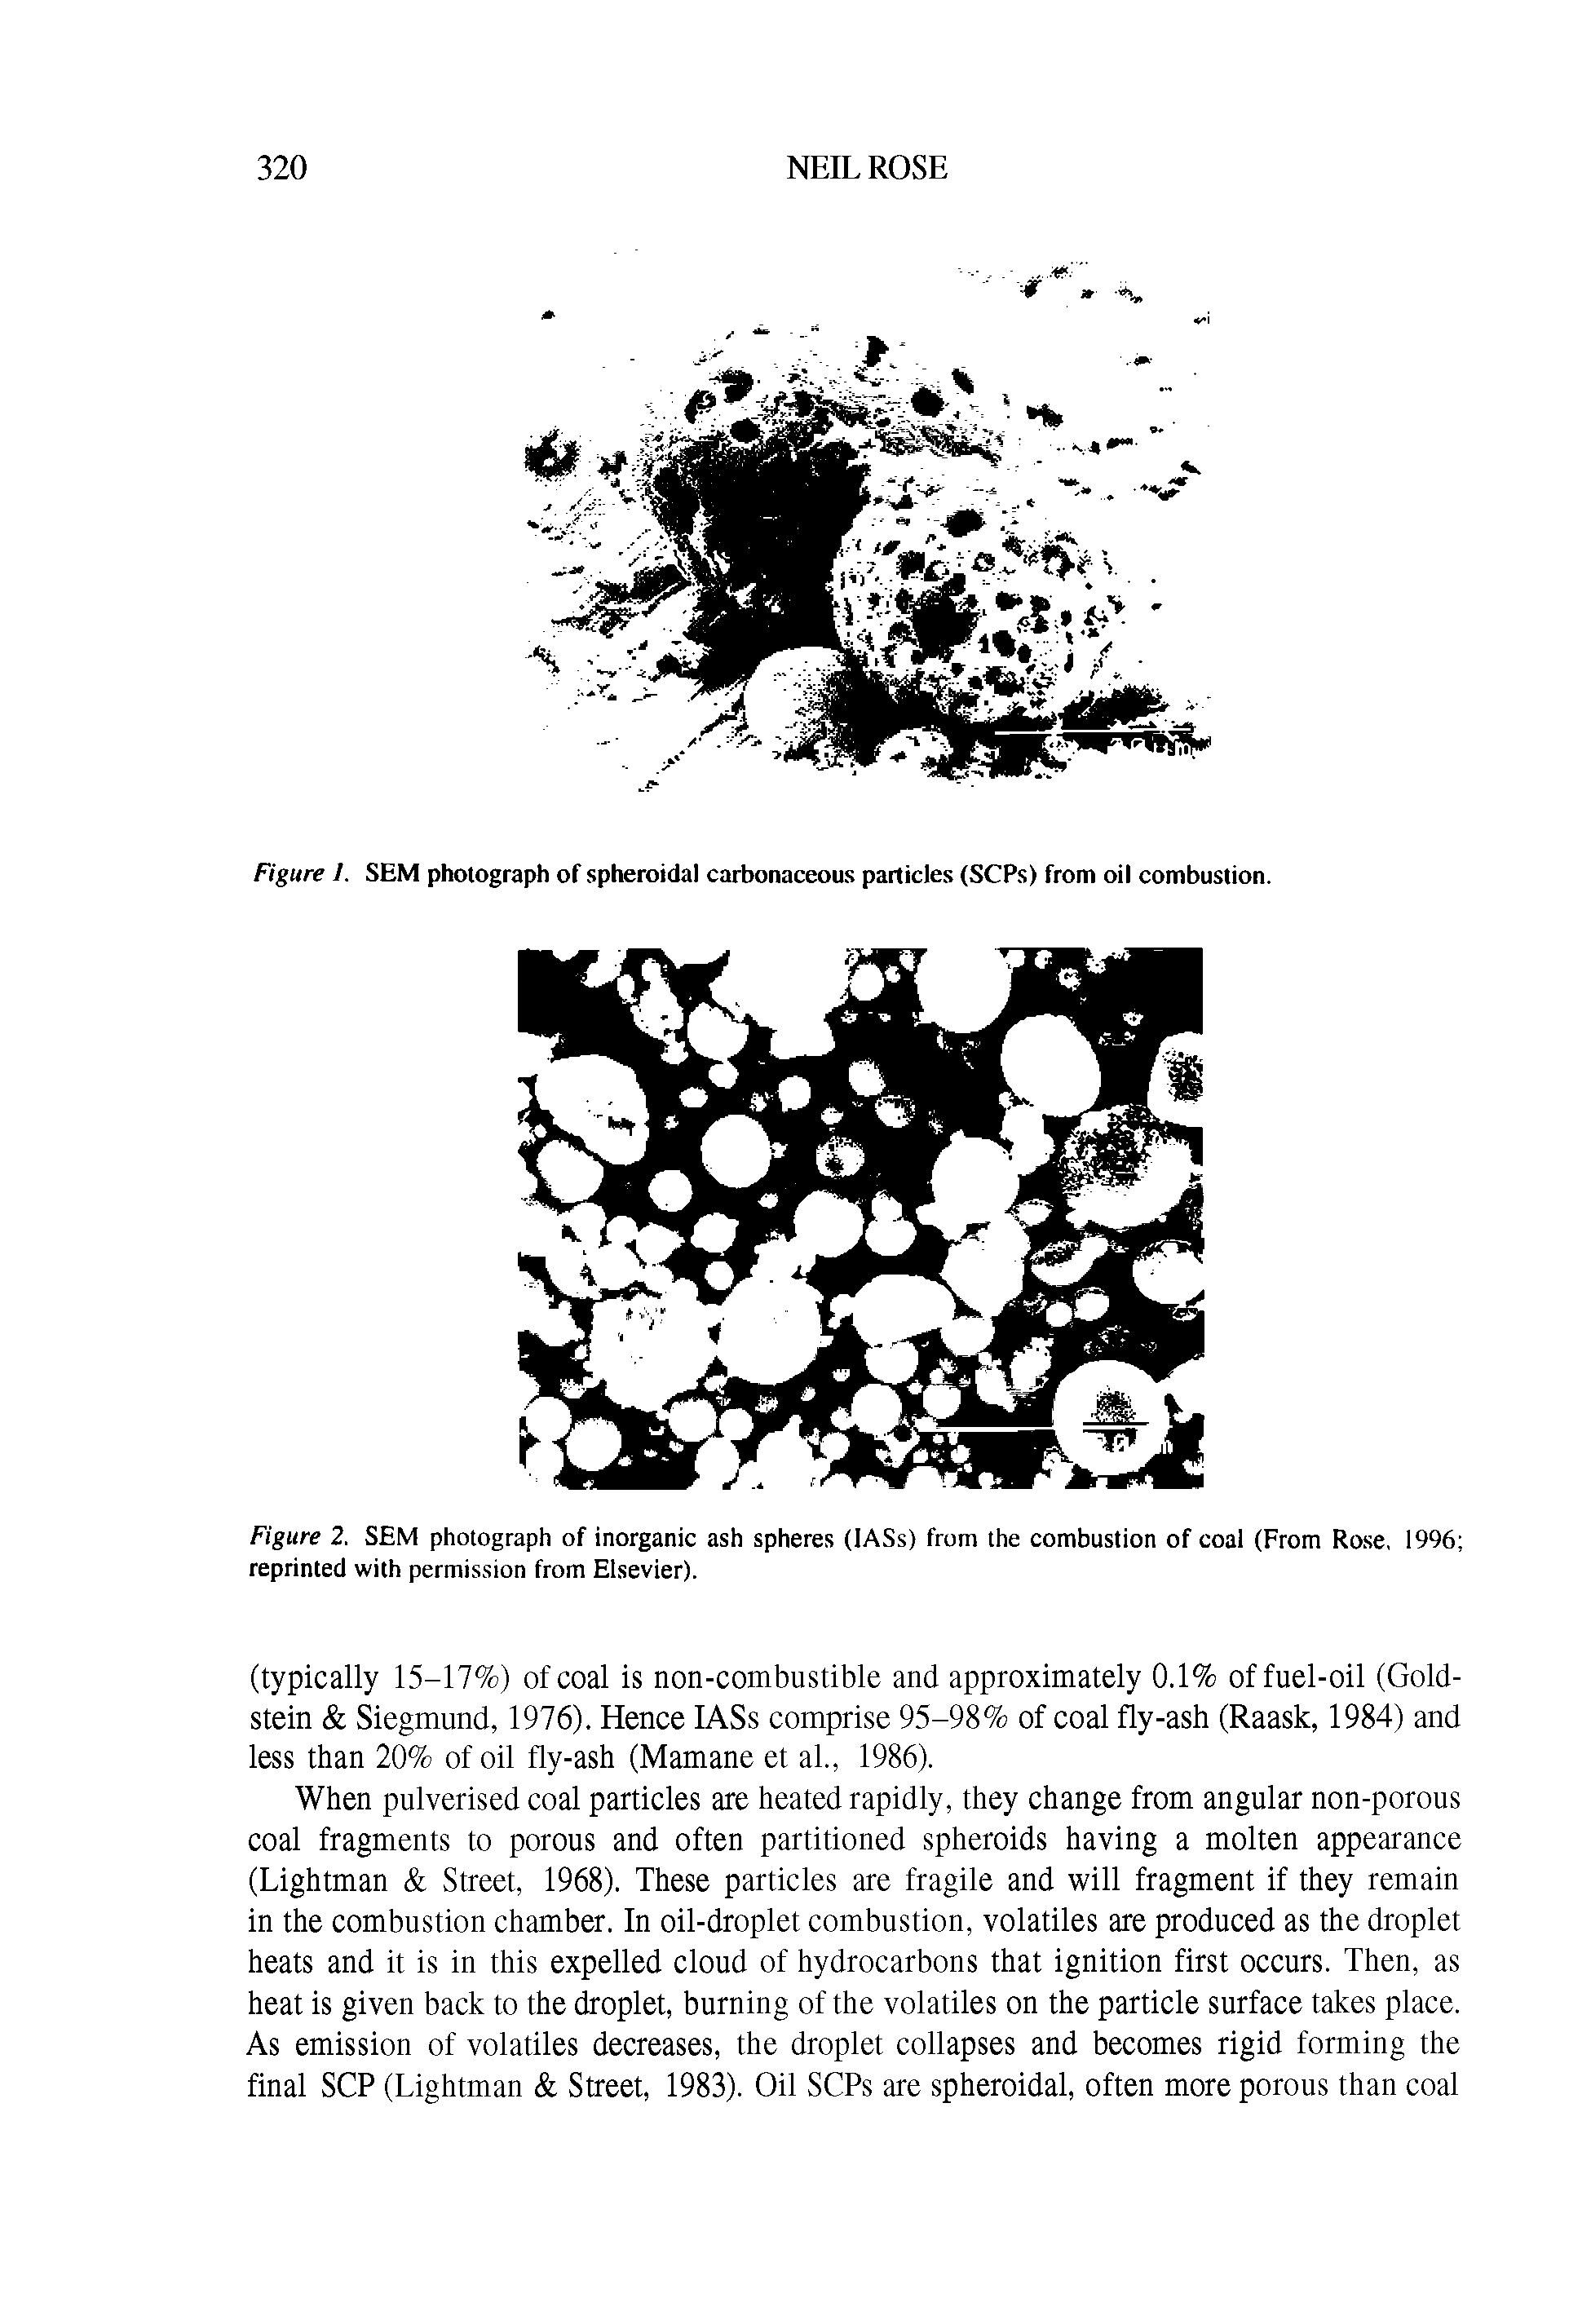 Figure 2. SEM photograph of inorganic ash spheres (IASs) from the combustion of coal (From Rose, 1996 reprinted with permission from Elsevier).